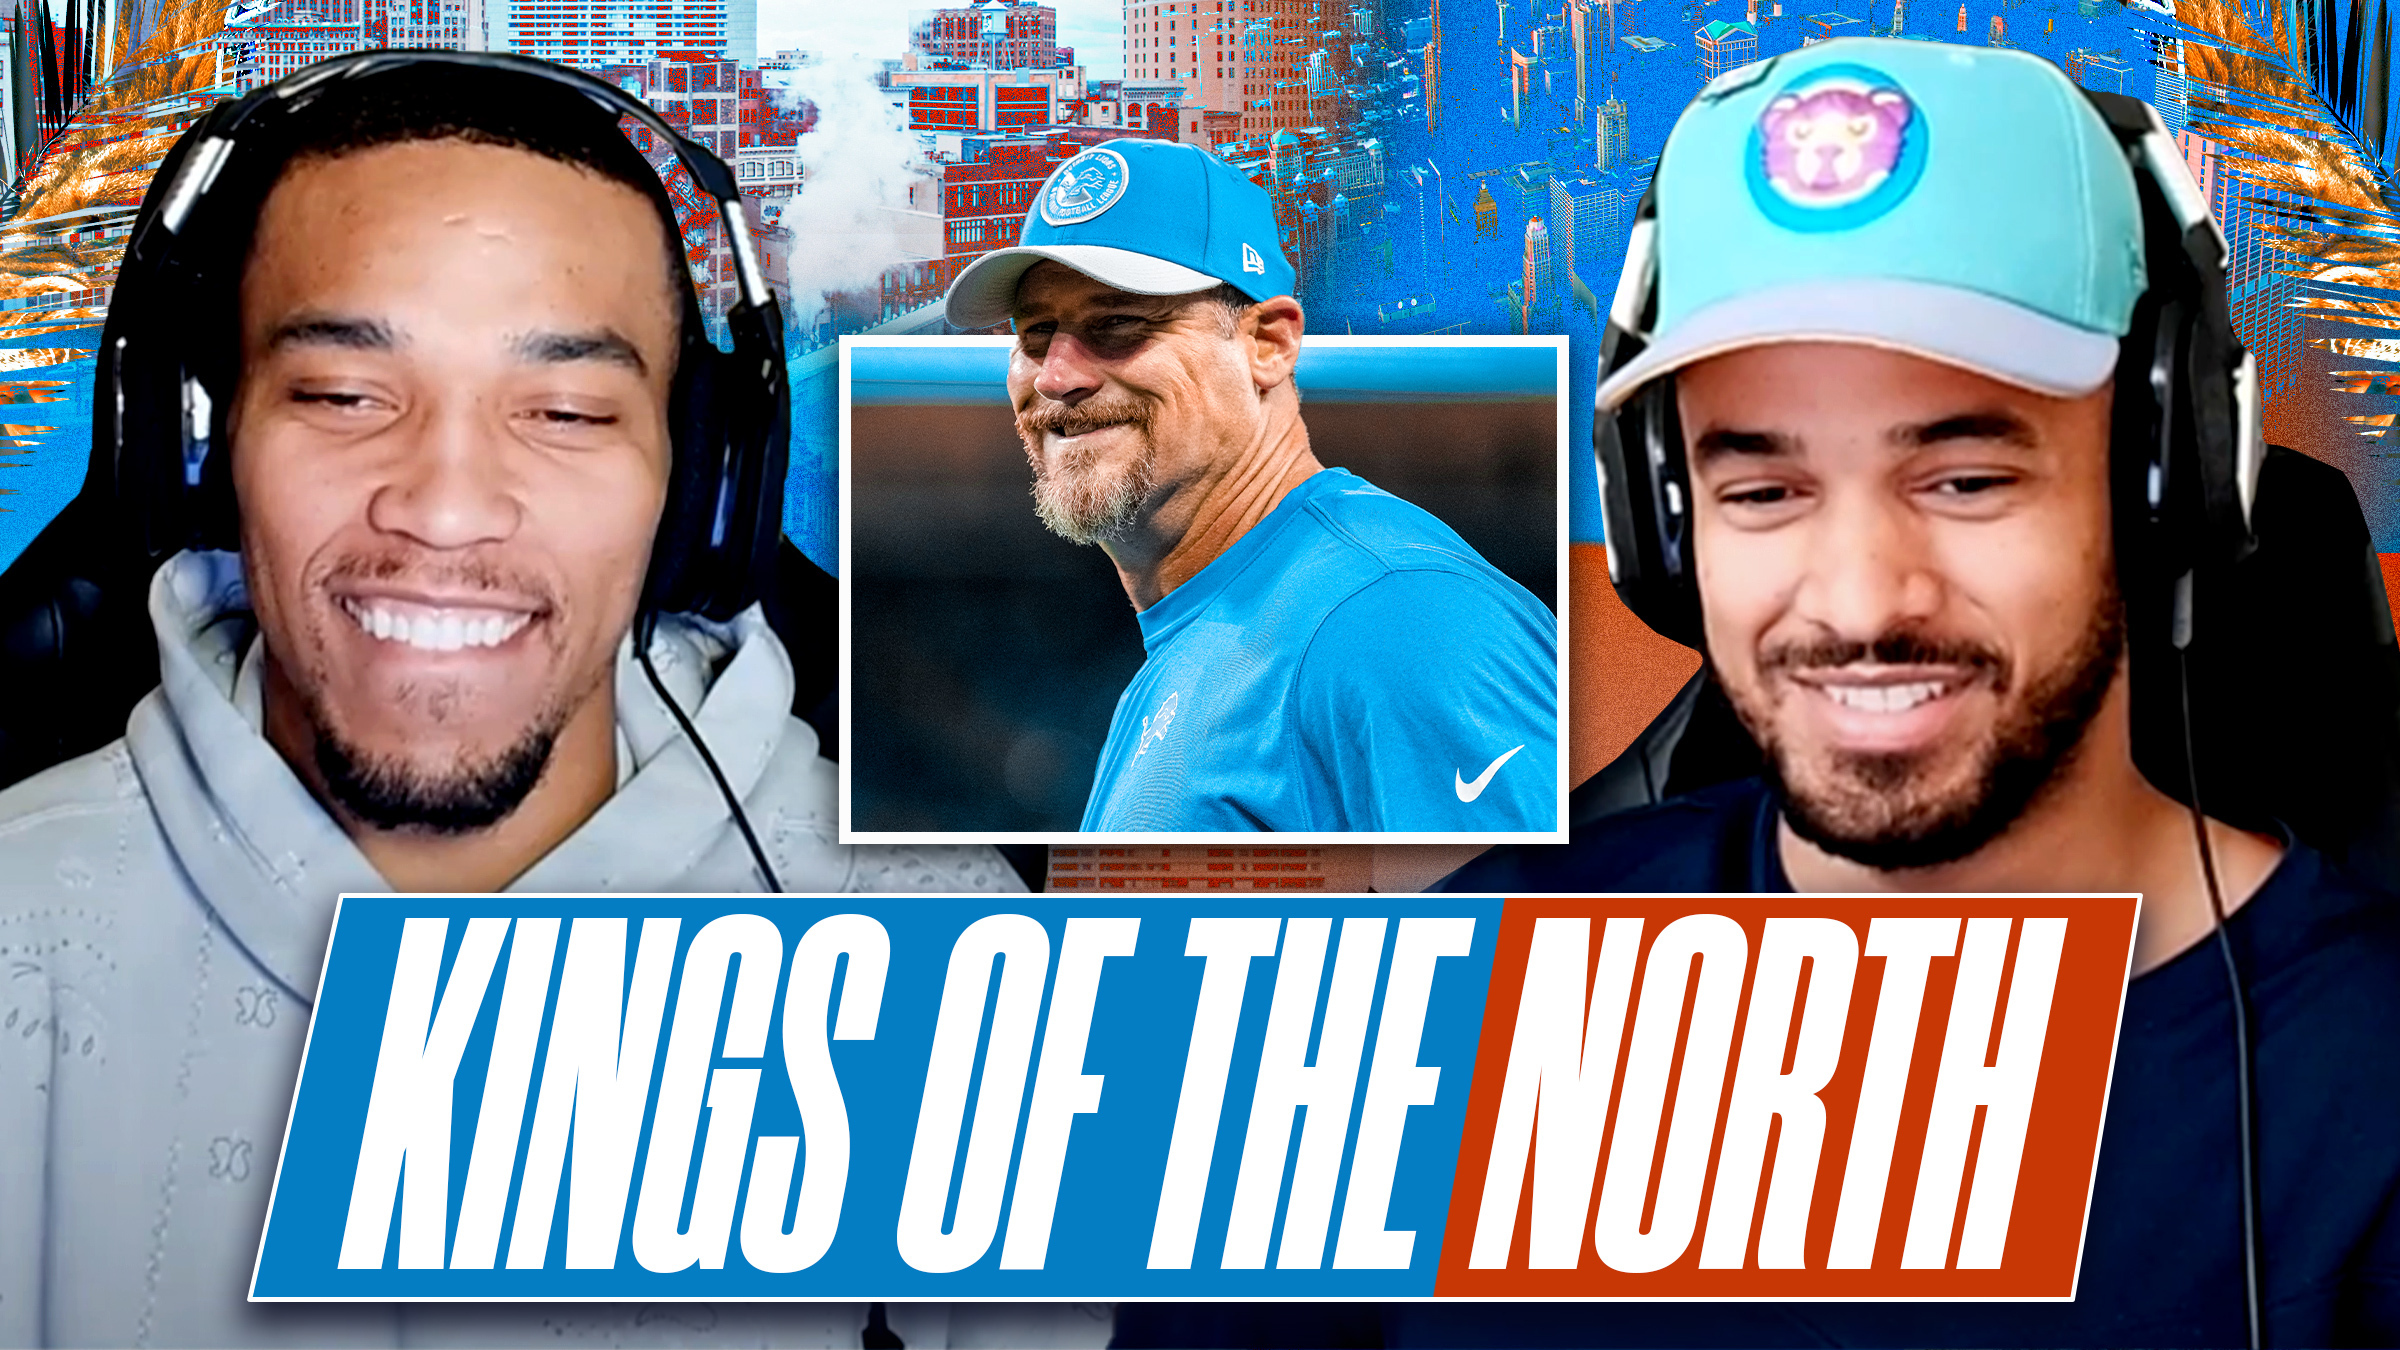 Screenshot from St. Brown Brothers podcast with Amon-Ra on the left, Equanimeous on the right and a photo of Dan Campbell between the two. Text reads: "Kinds of the North"